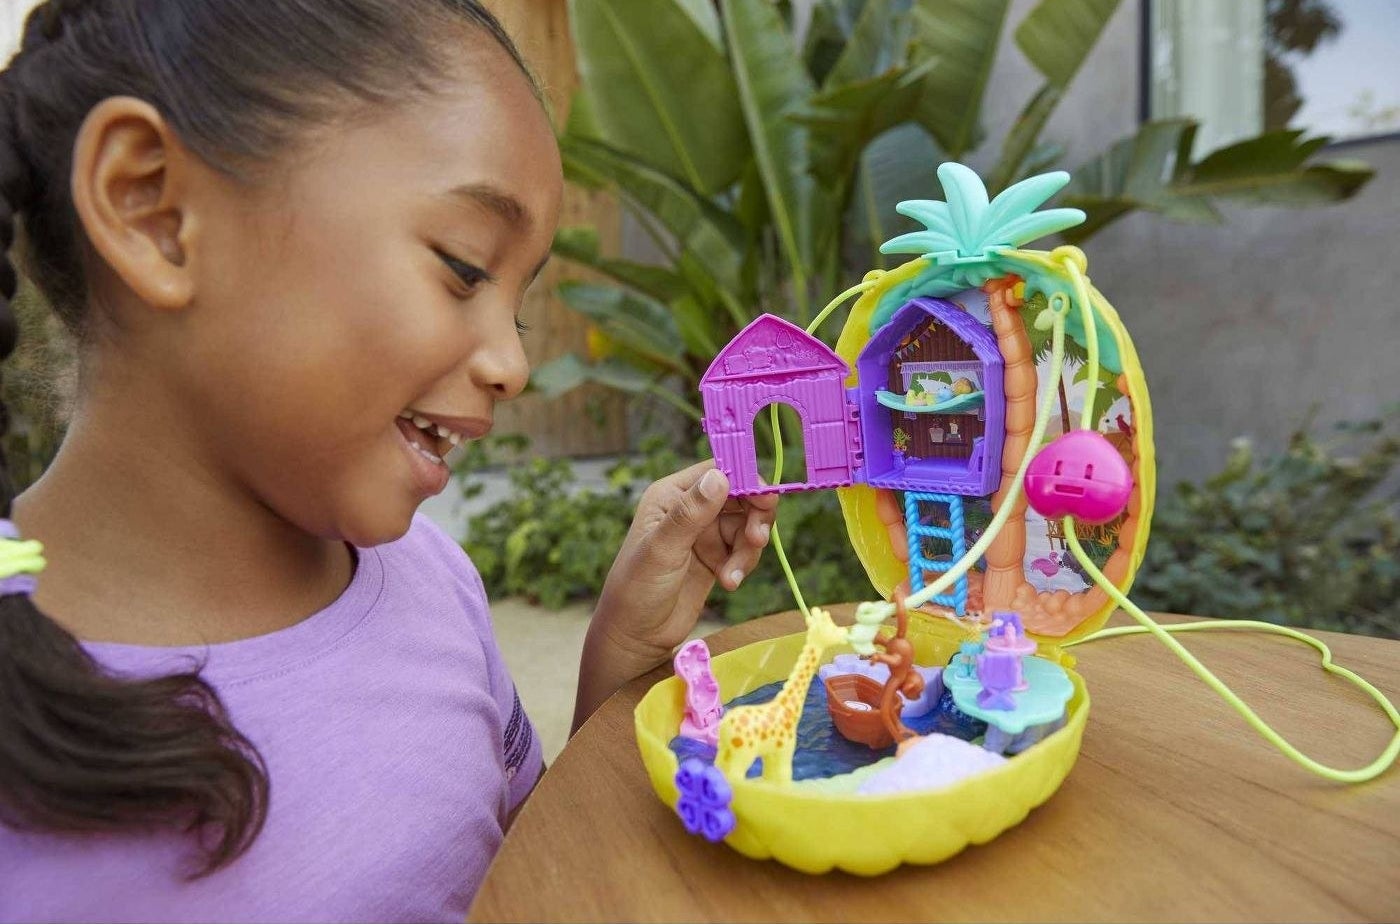 Girl playing with Polly Pocket purse